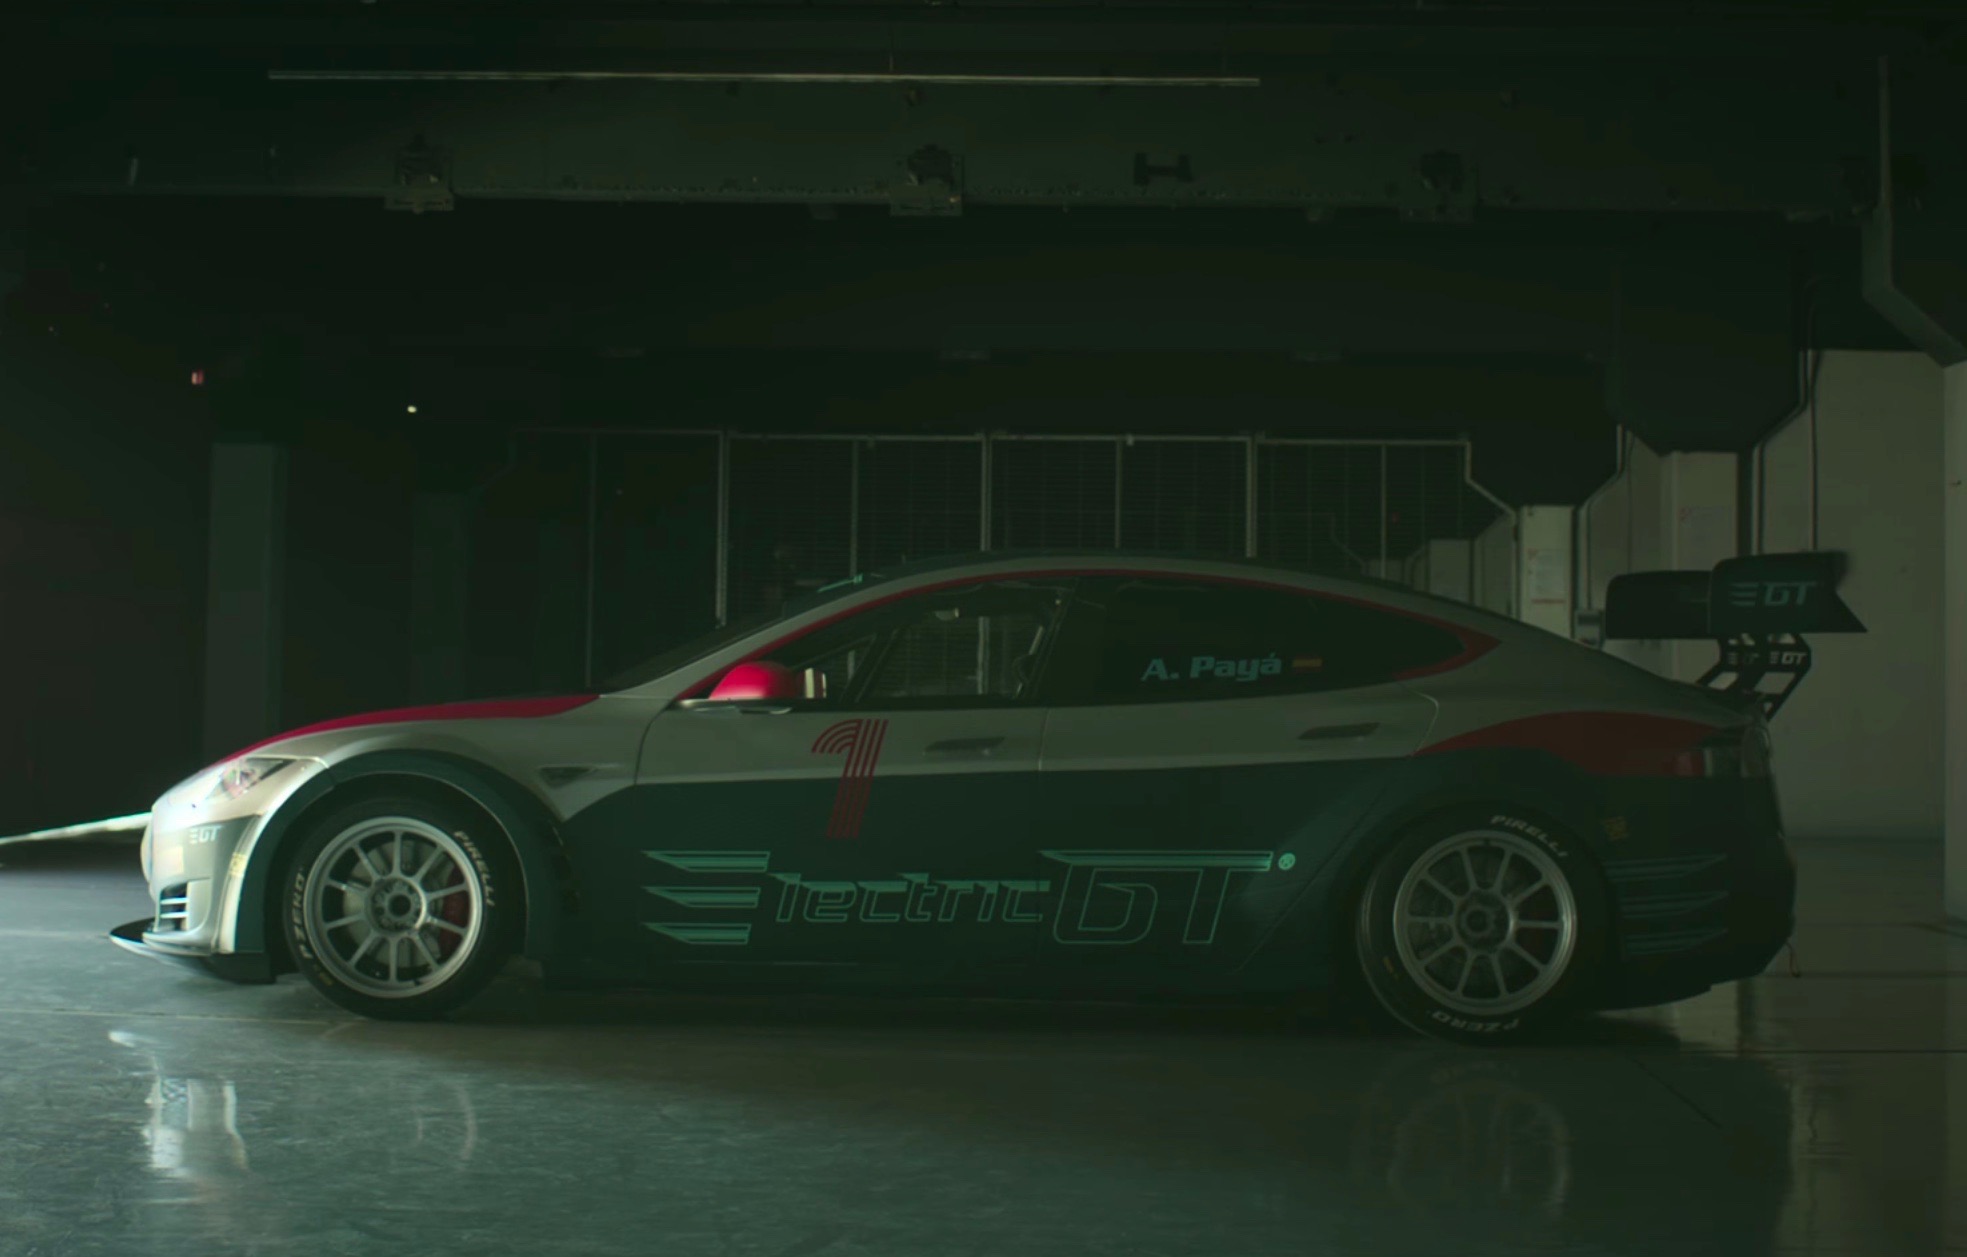 Tesla Model S racing car revealed for Electric GT championship